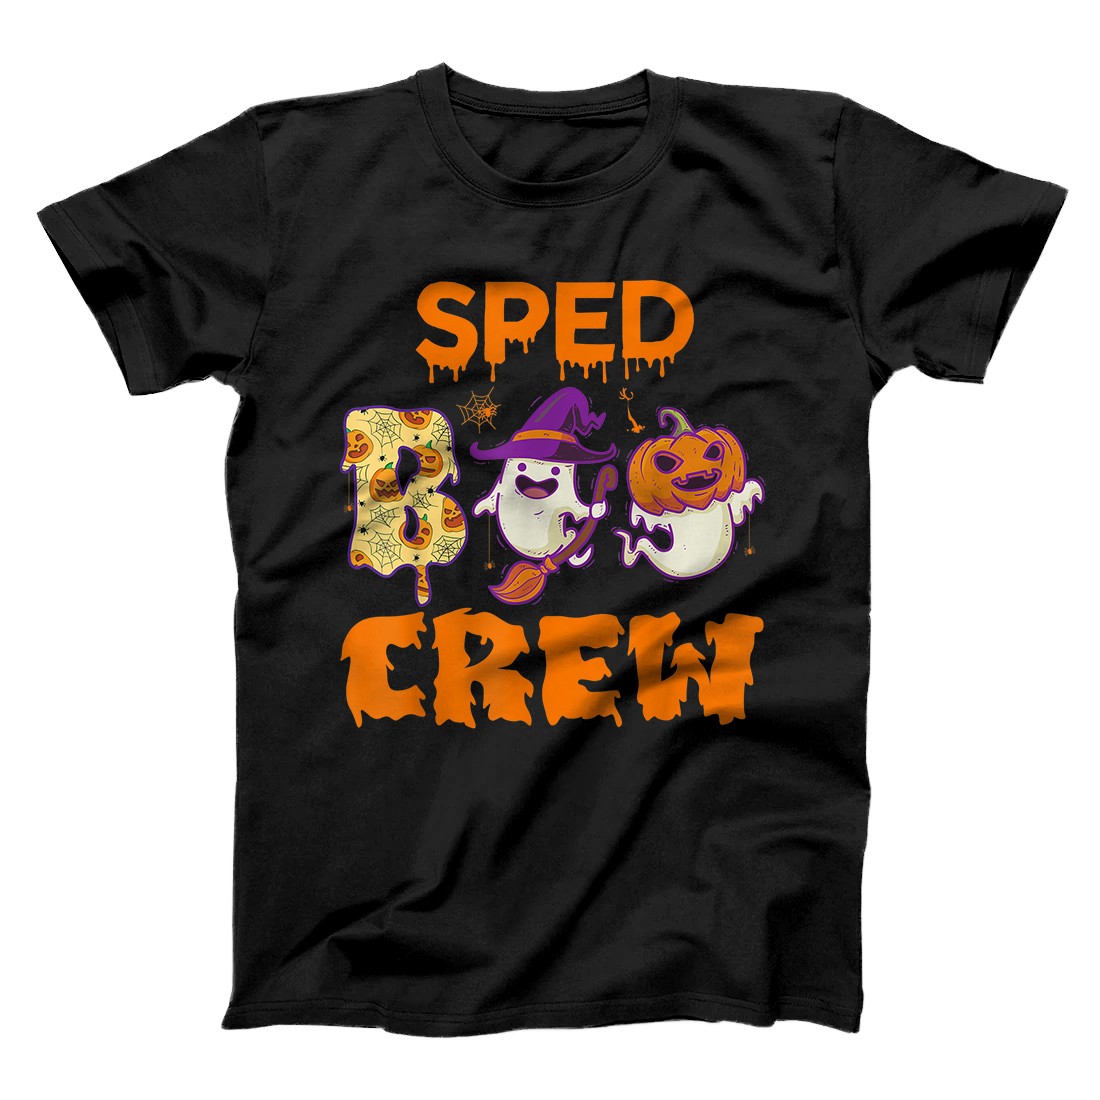 Personalized Sped Boo Crew Gift. Sped Crew Halloween Costume T-Shirt